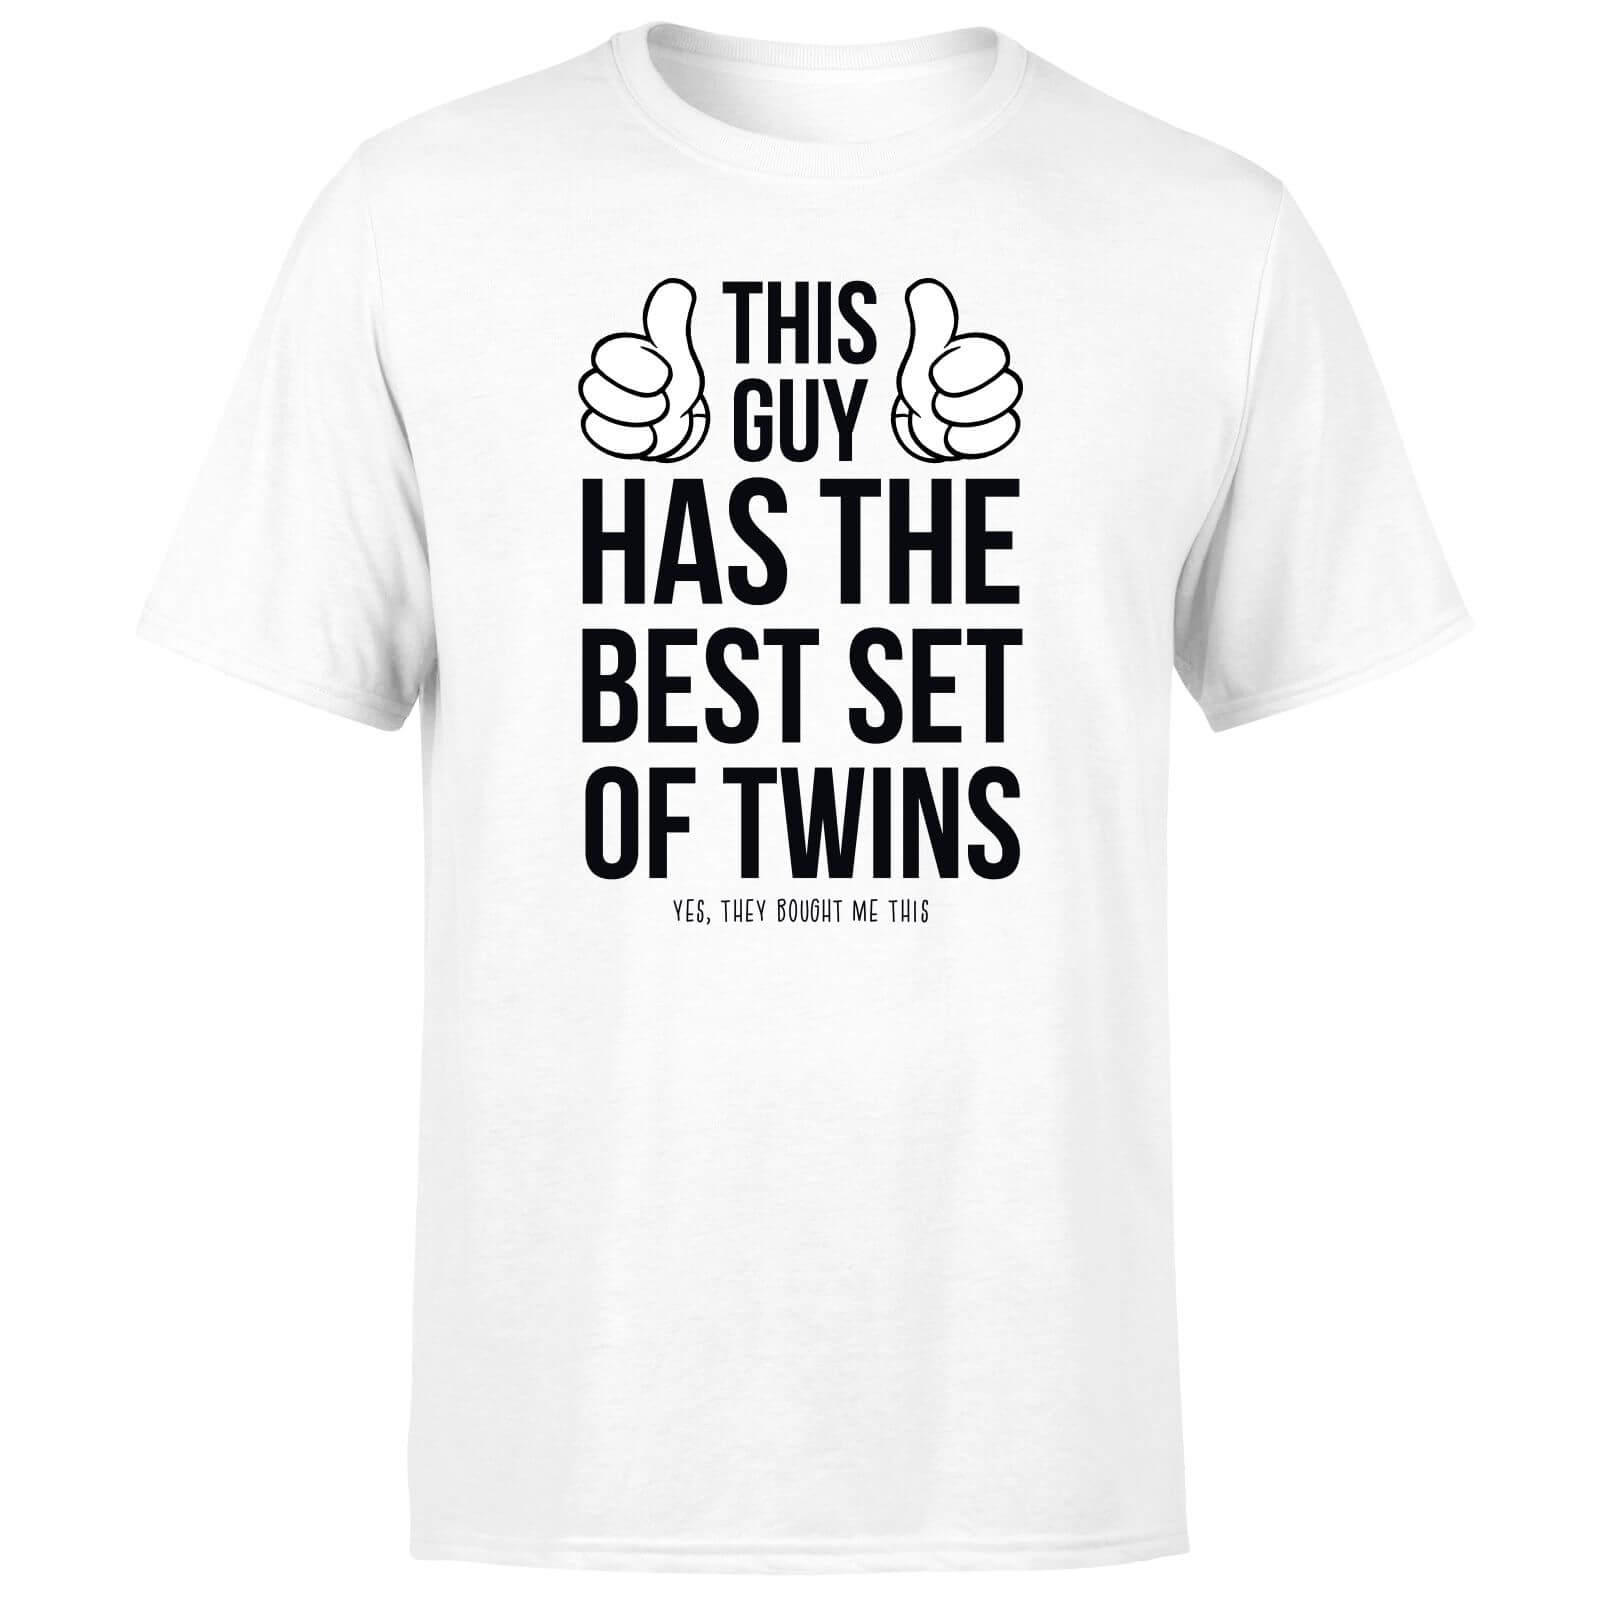 This Guy Has The Best Twins Men's T-Shirt - White - S